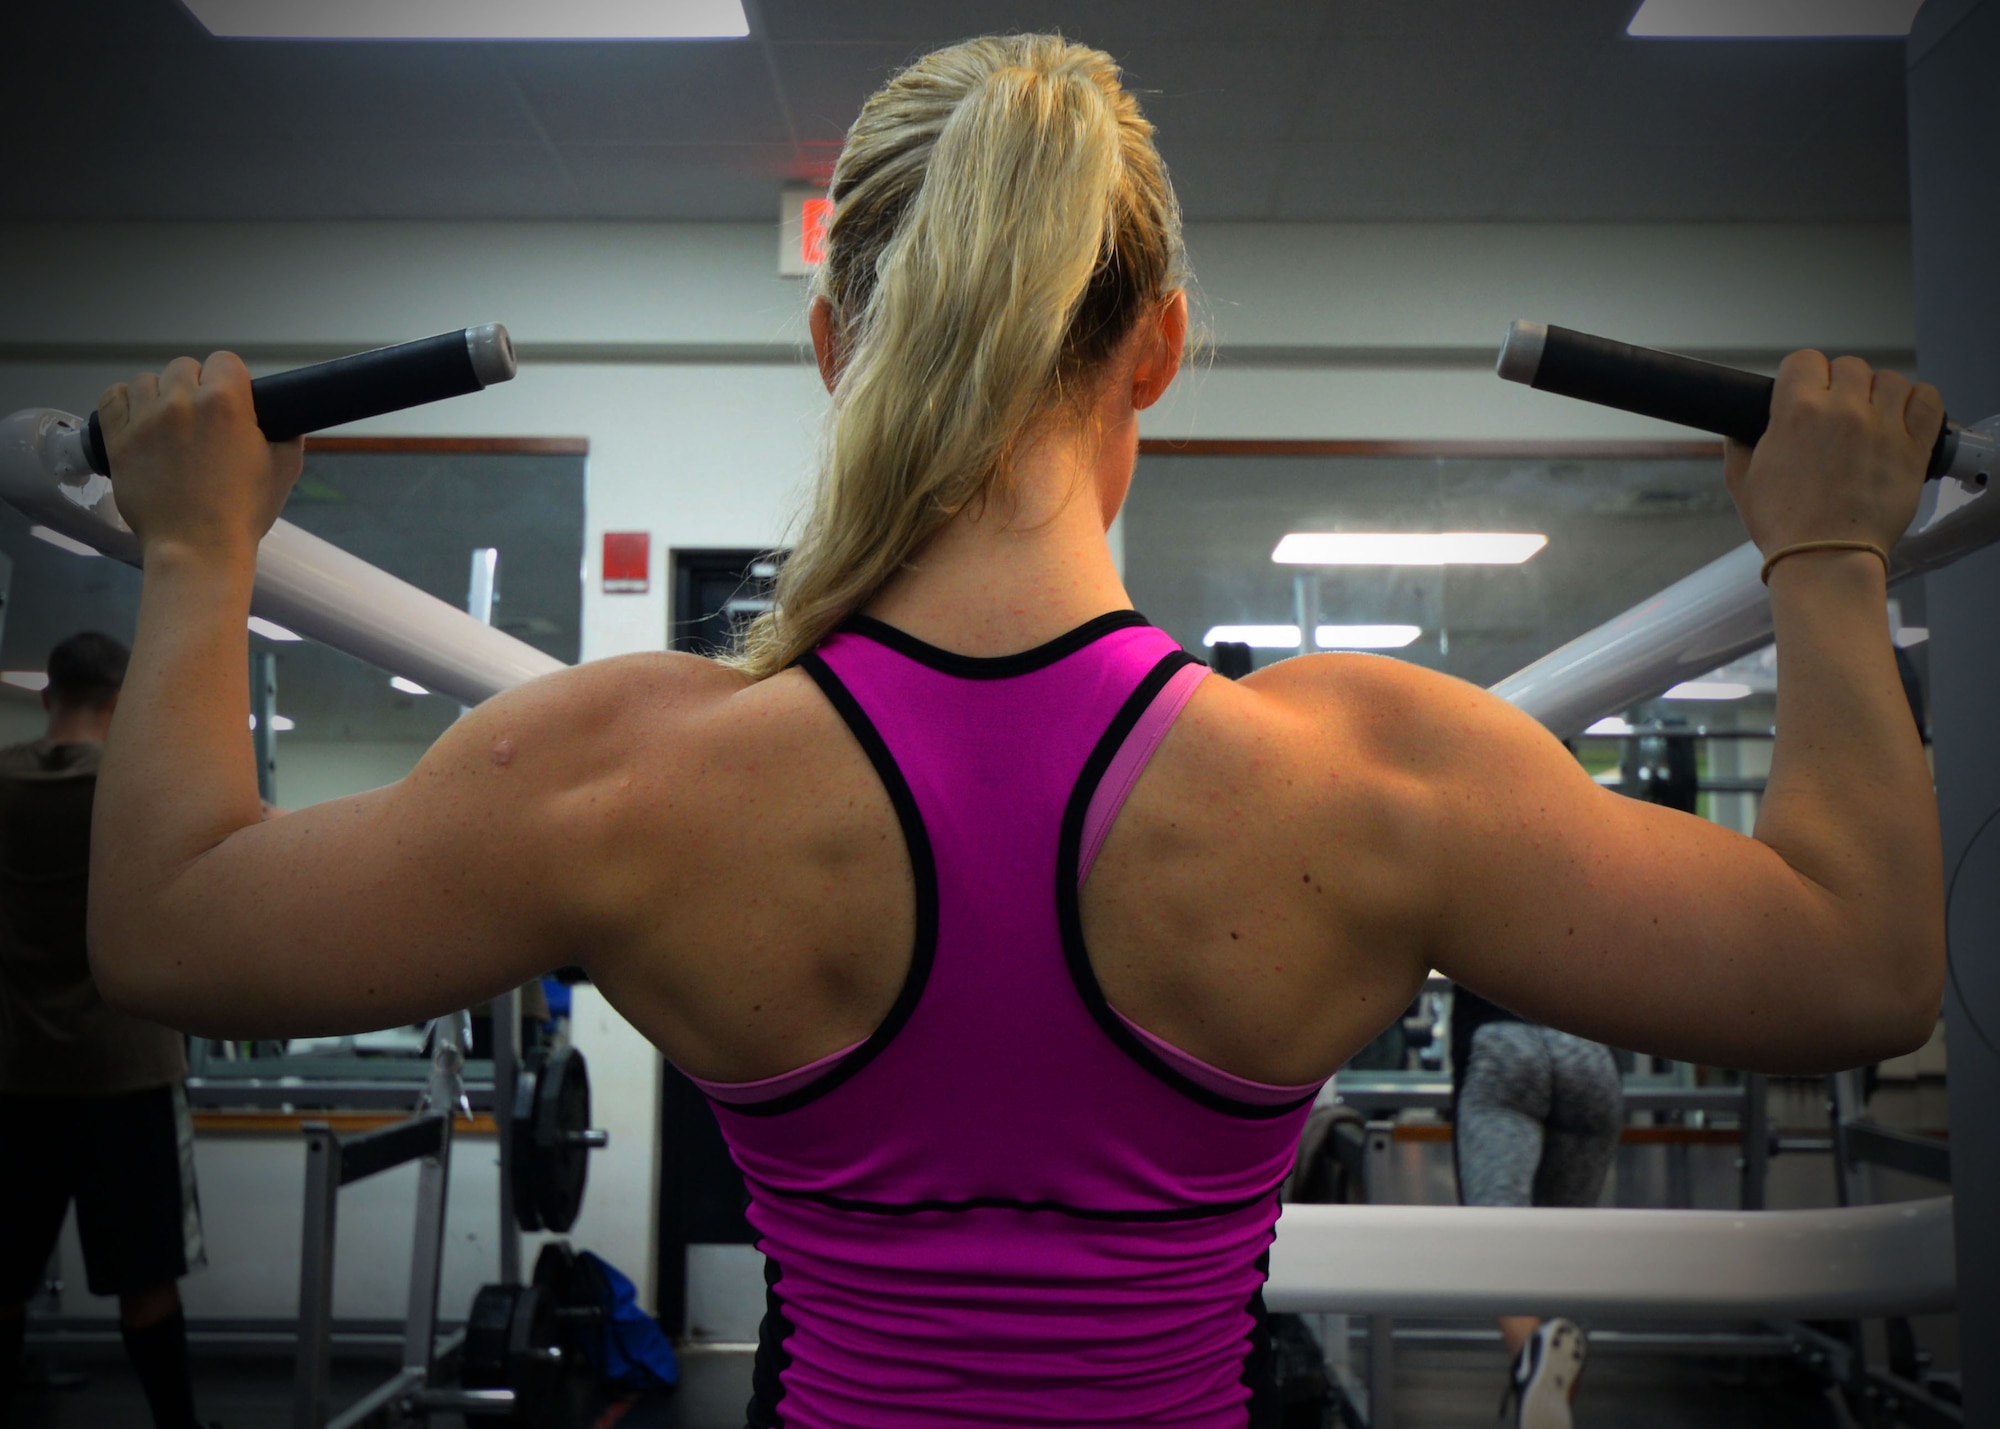 Senior Airman Kelly Berger, 36th Civil Engineer Squadron pest management journeyman, performs a lat pulldown Oct. 2, 2015, at Andersen Air Force Base, Guam.  In September, Berger competed in and placed first in her division in the 2015 Guam National Fitness Championships and International Invitational. (U.S. Air Force photo by Senior Airman Joshua Smoot/Released)